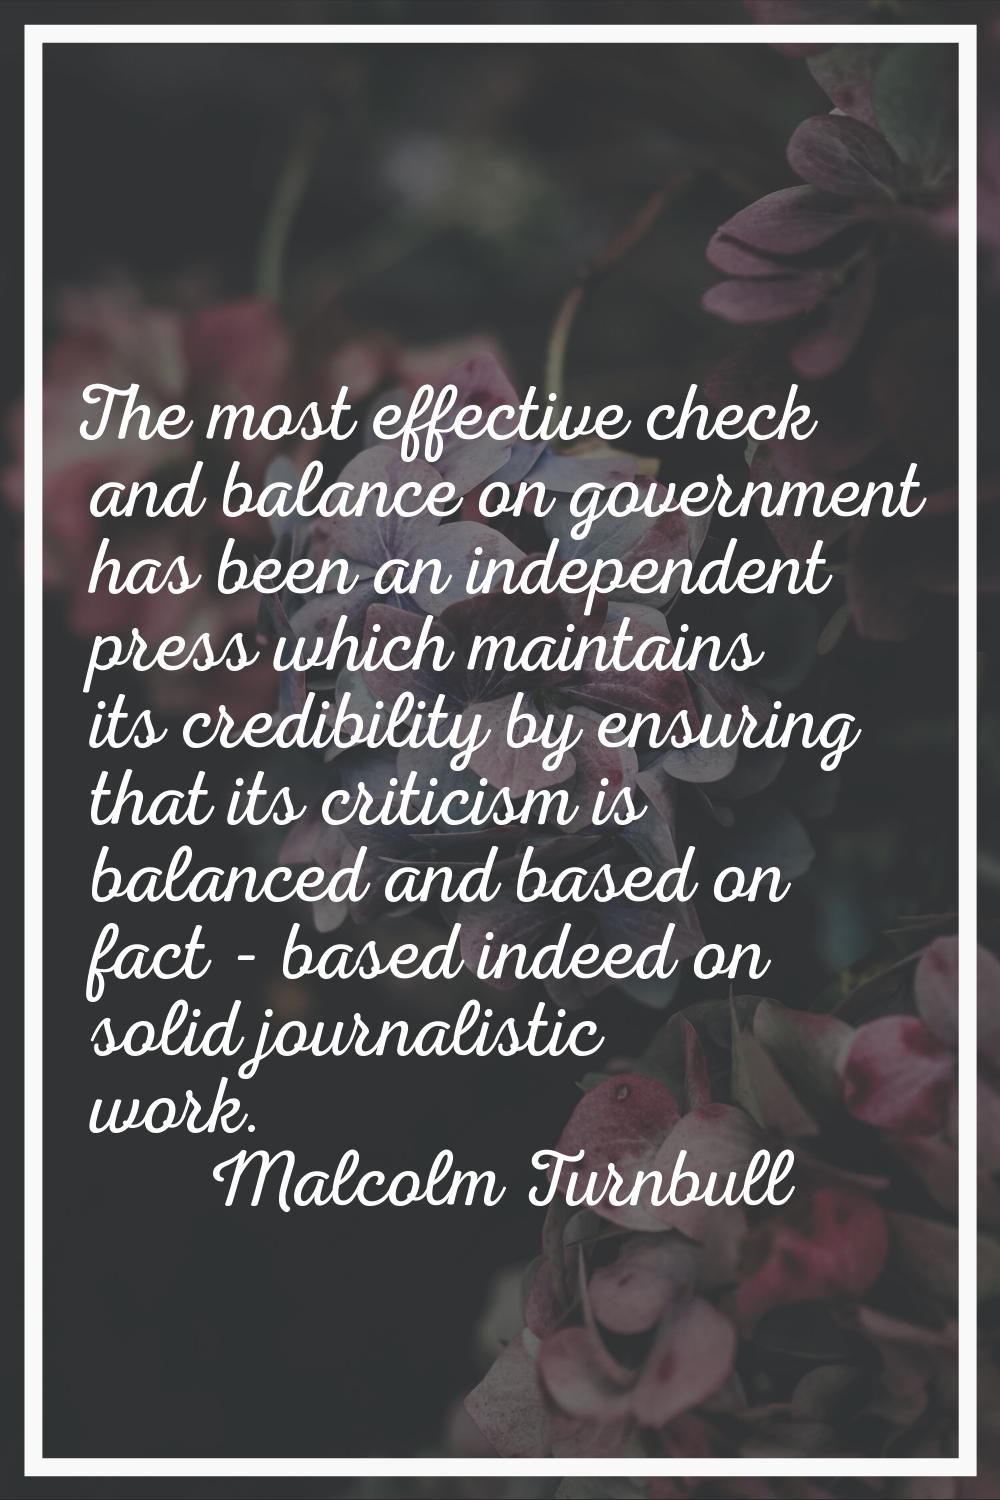 The most effective check and balance on government has been an independent press which maintains it